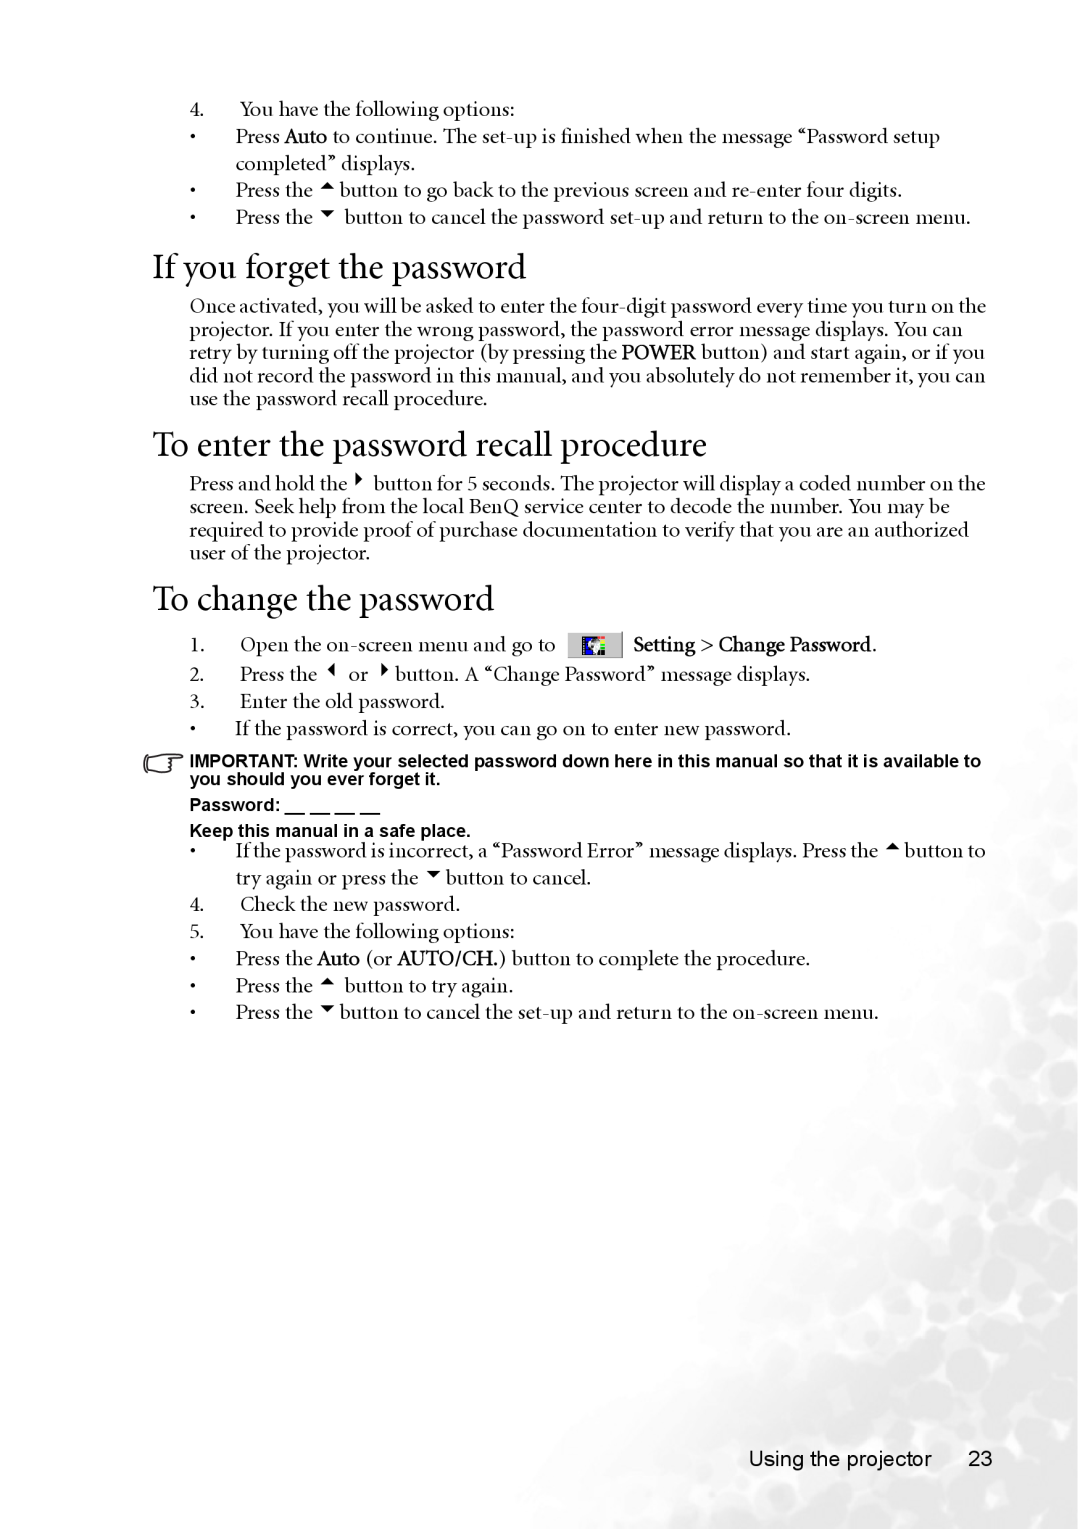 BenQ CP120 manual If you forget the password, To enter the password recall procedure, To change the password 